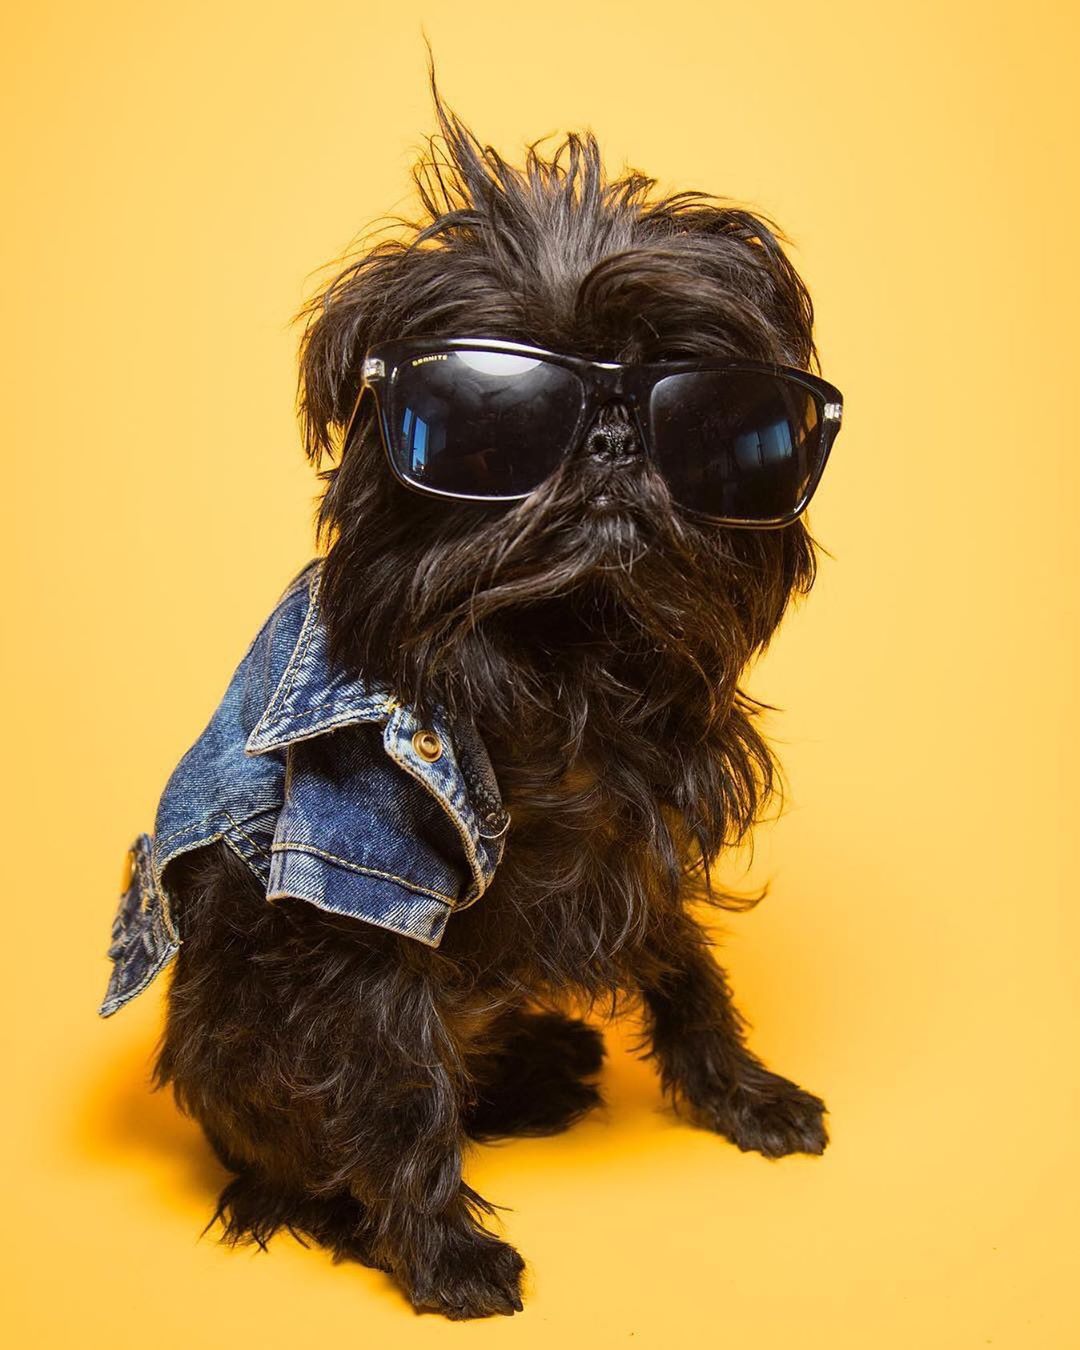 A Affenpinscher wearing denim jacket and sunglasses while sitting in a yellow background